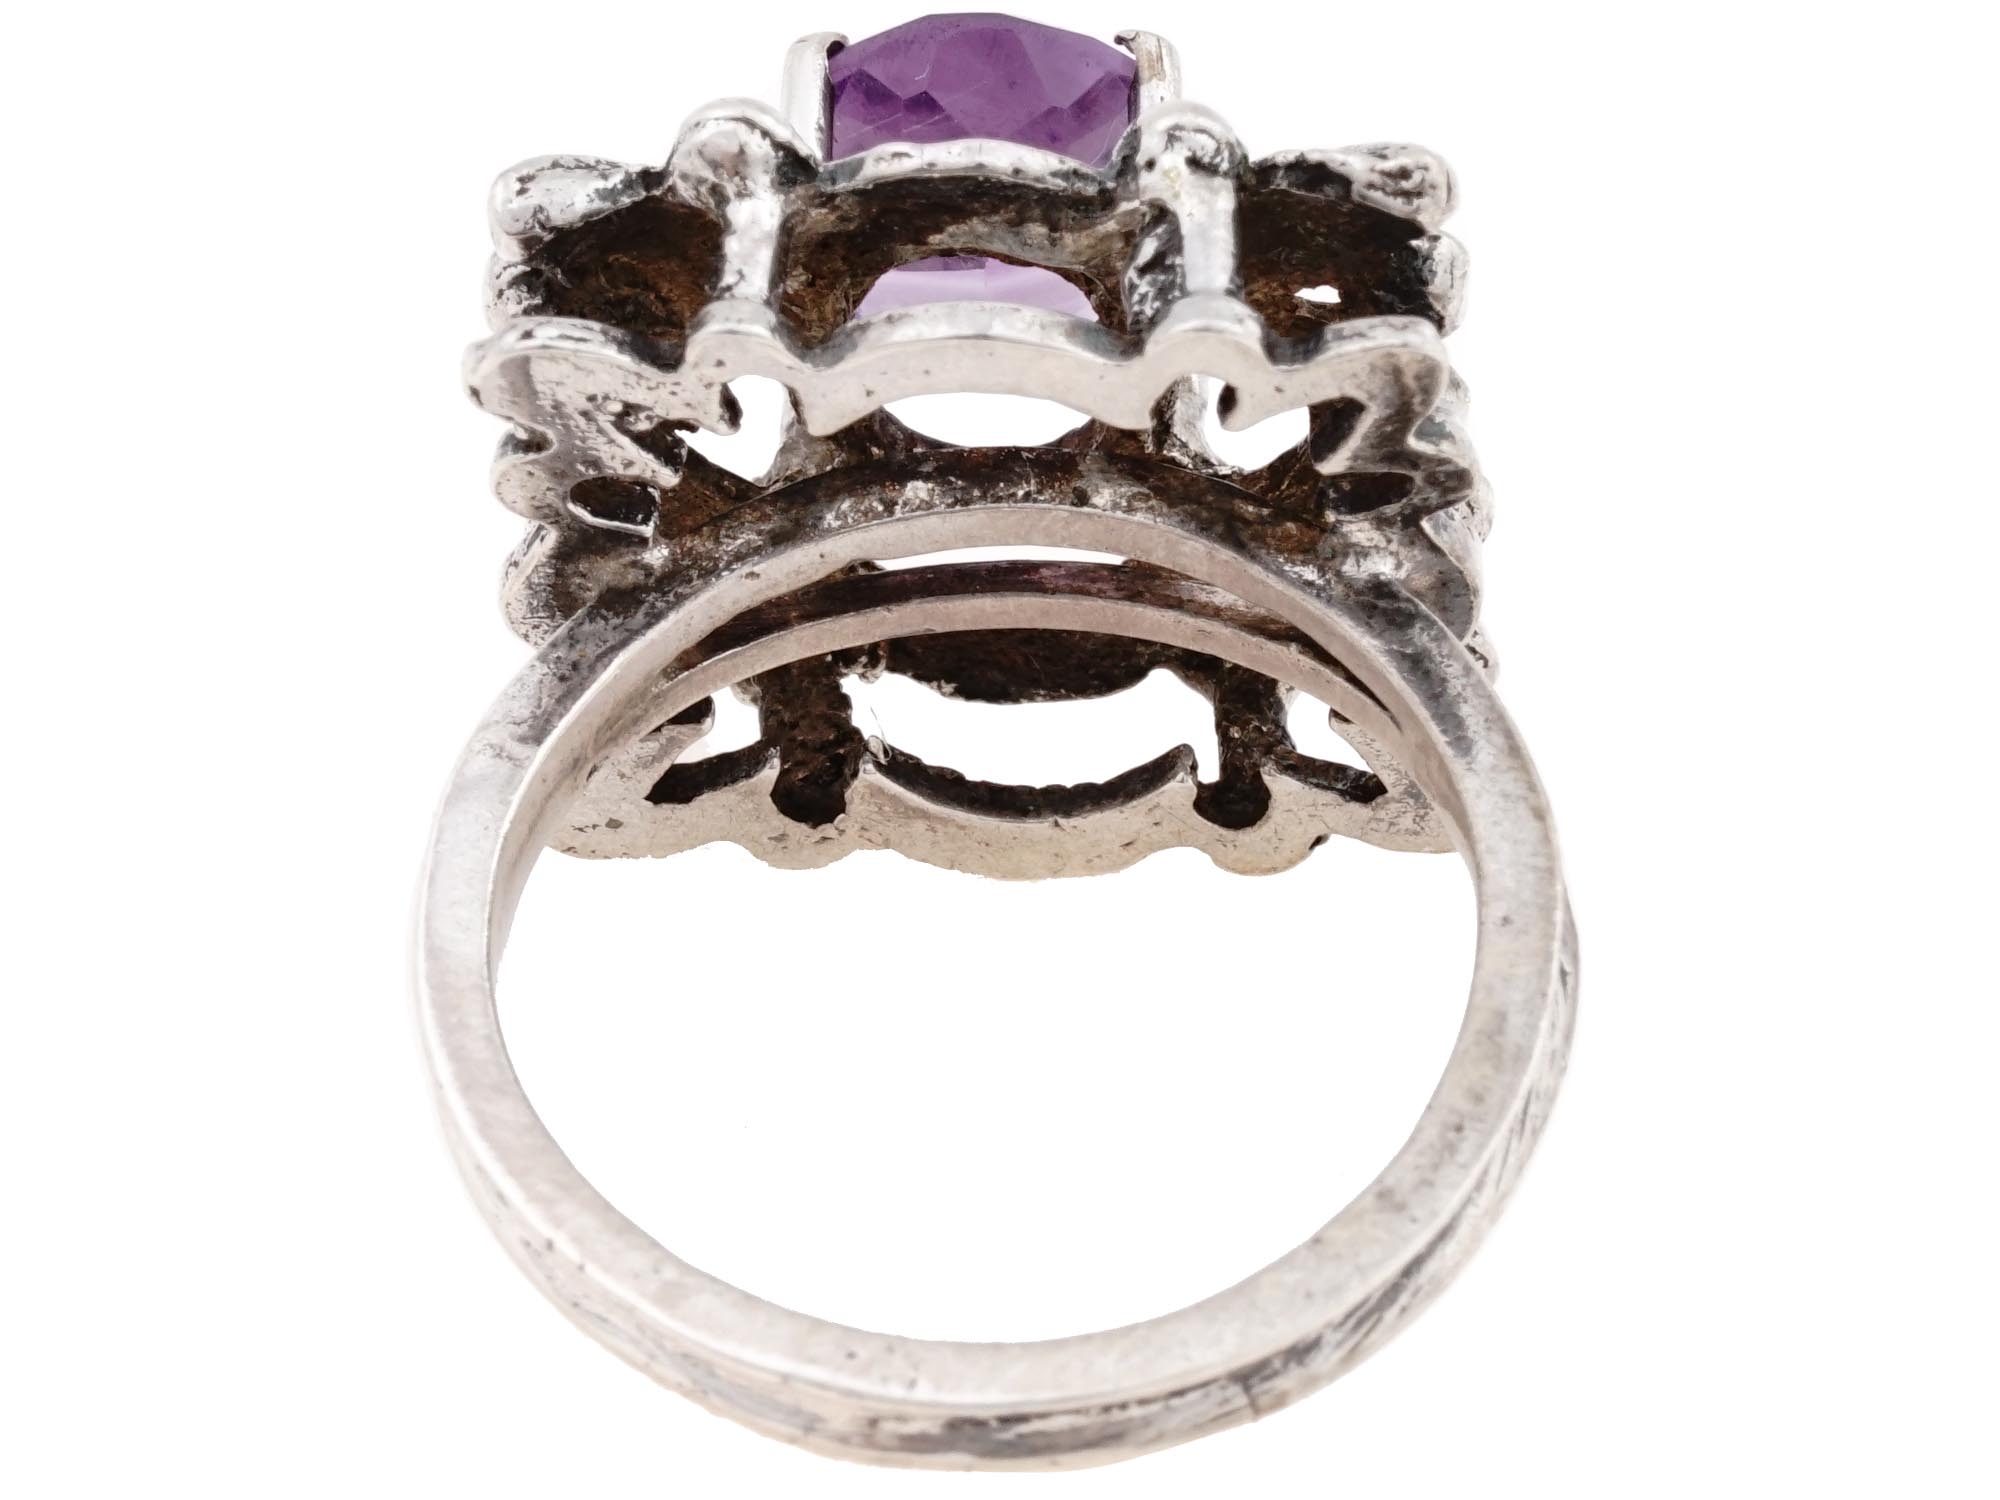 ART NOUVEAU 800 SILVER AMETHYST STONE JEWELRY RING PIC-3